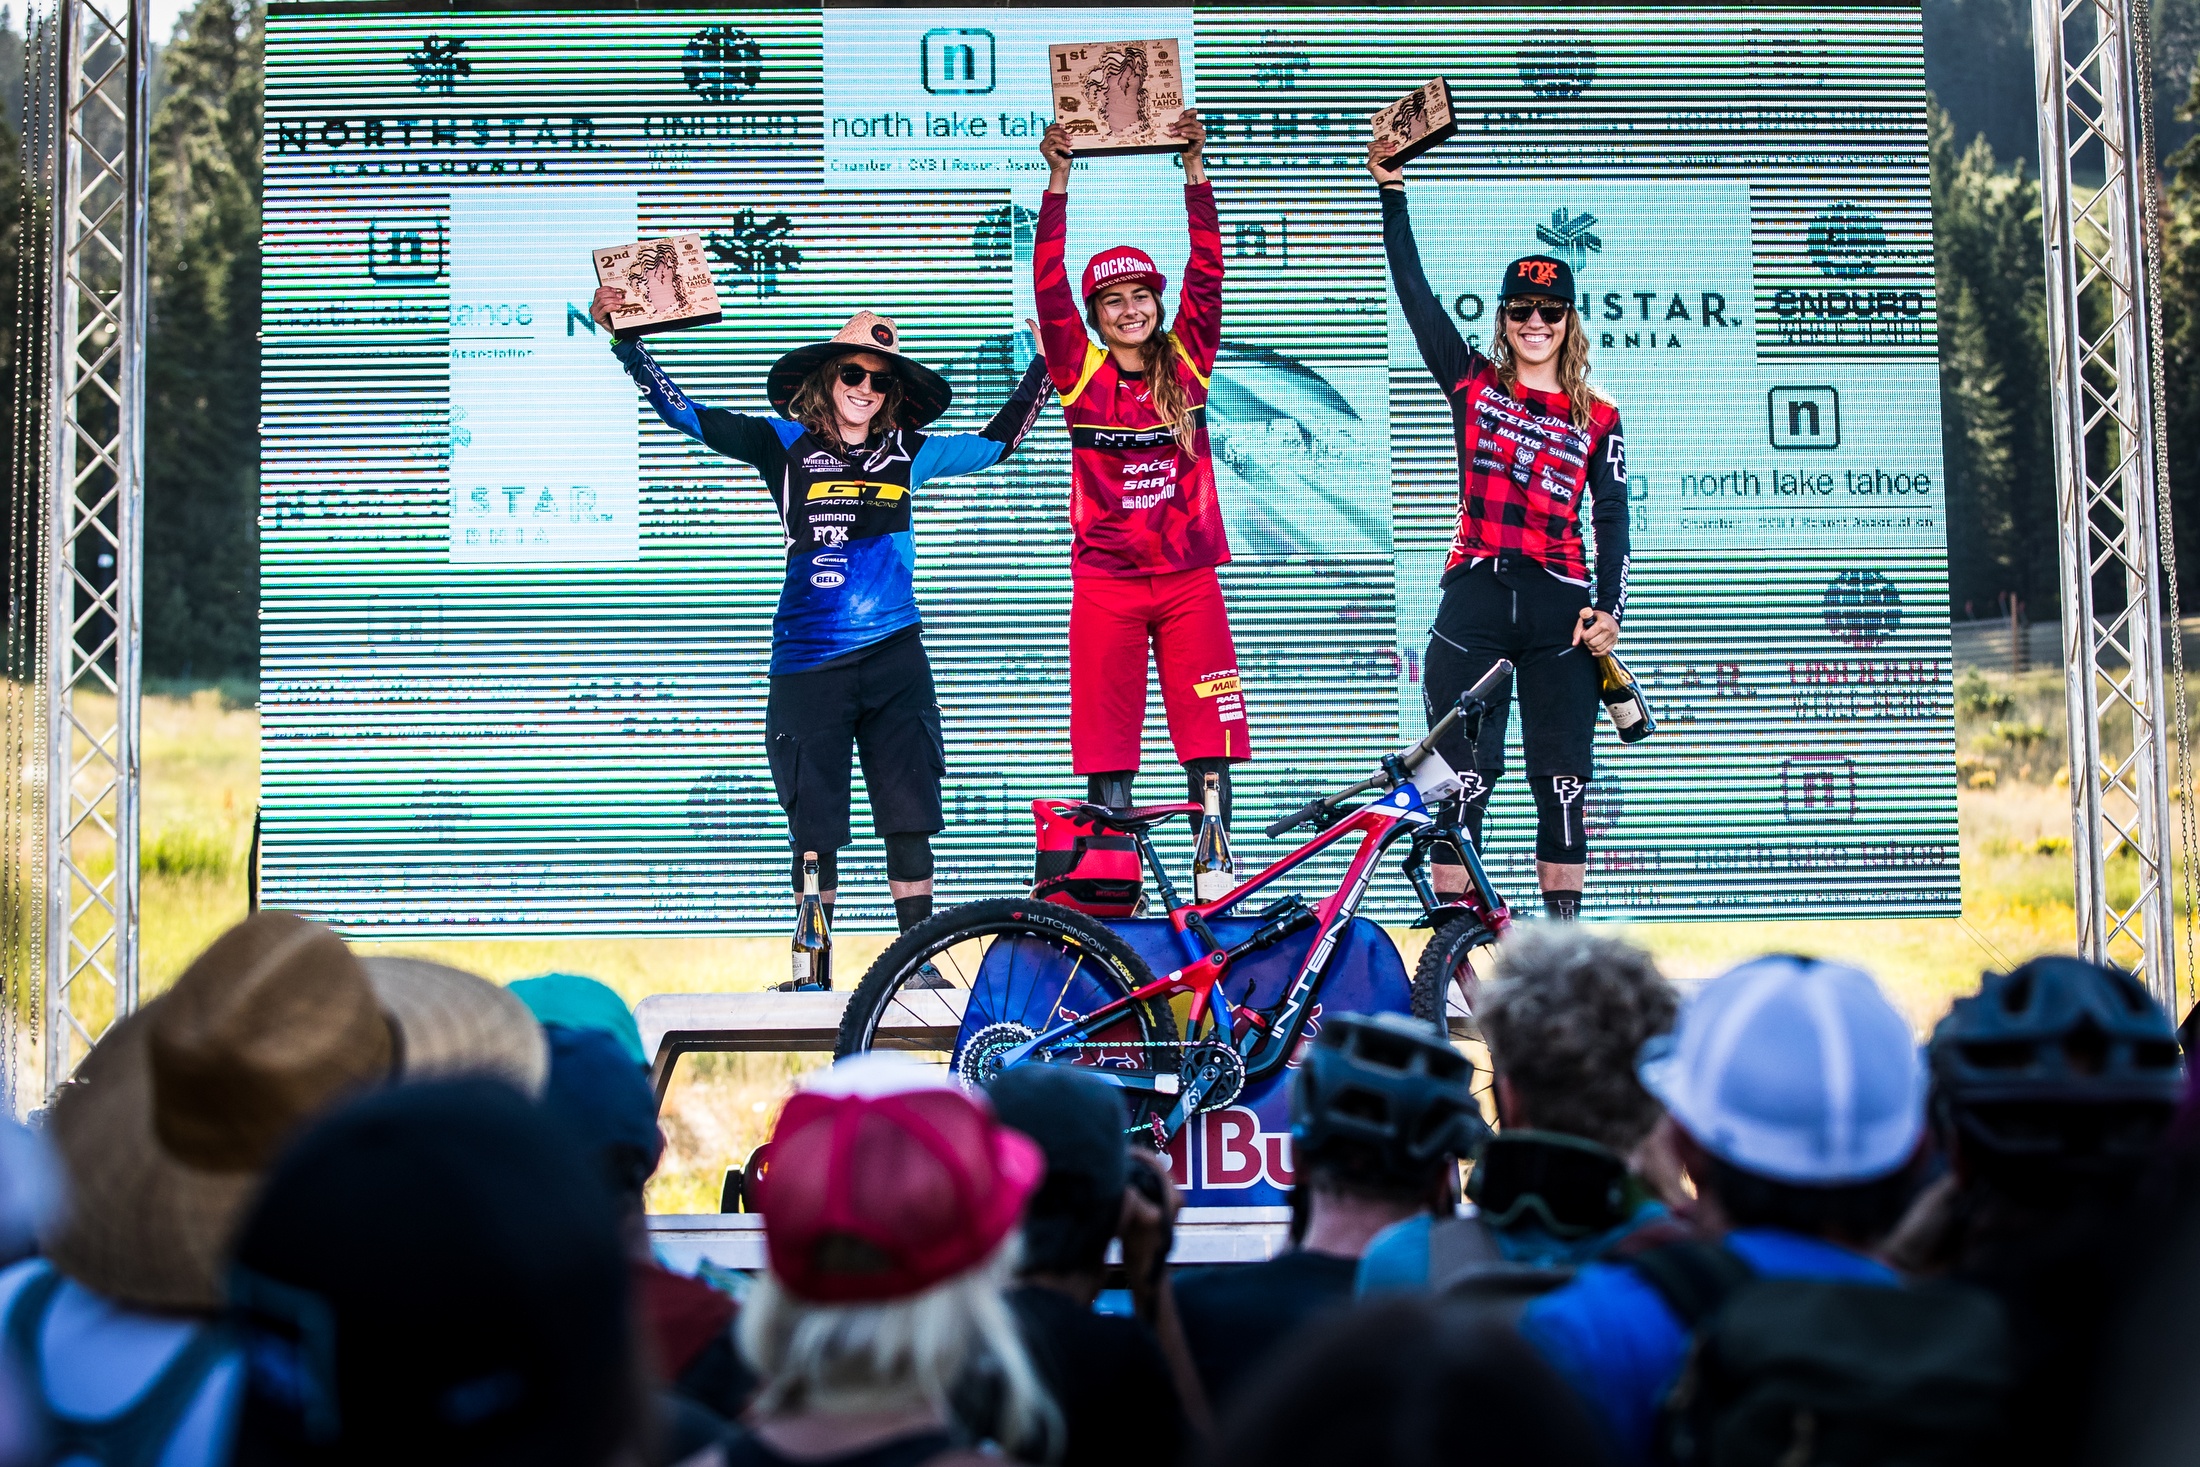 Andreane Lanthier Nadeau takes home a well deserved thrid place in the Pro Women.